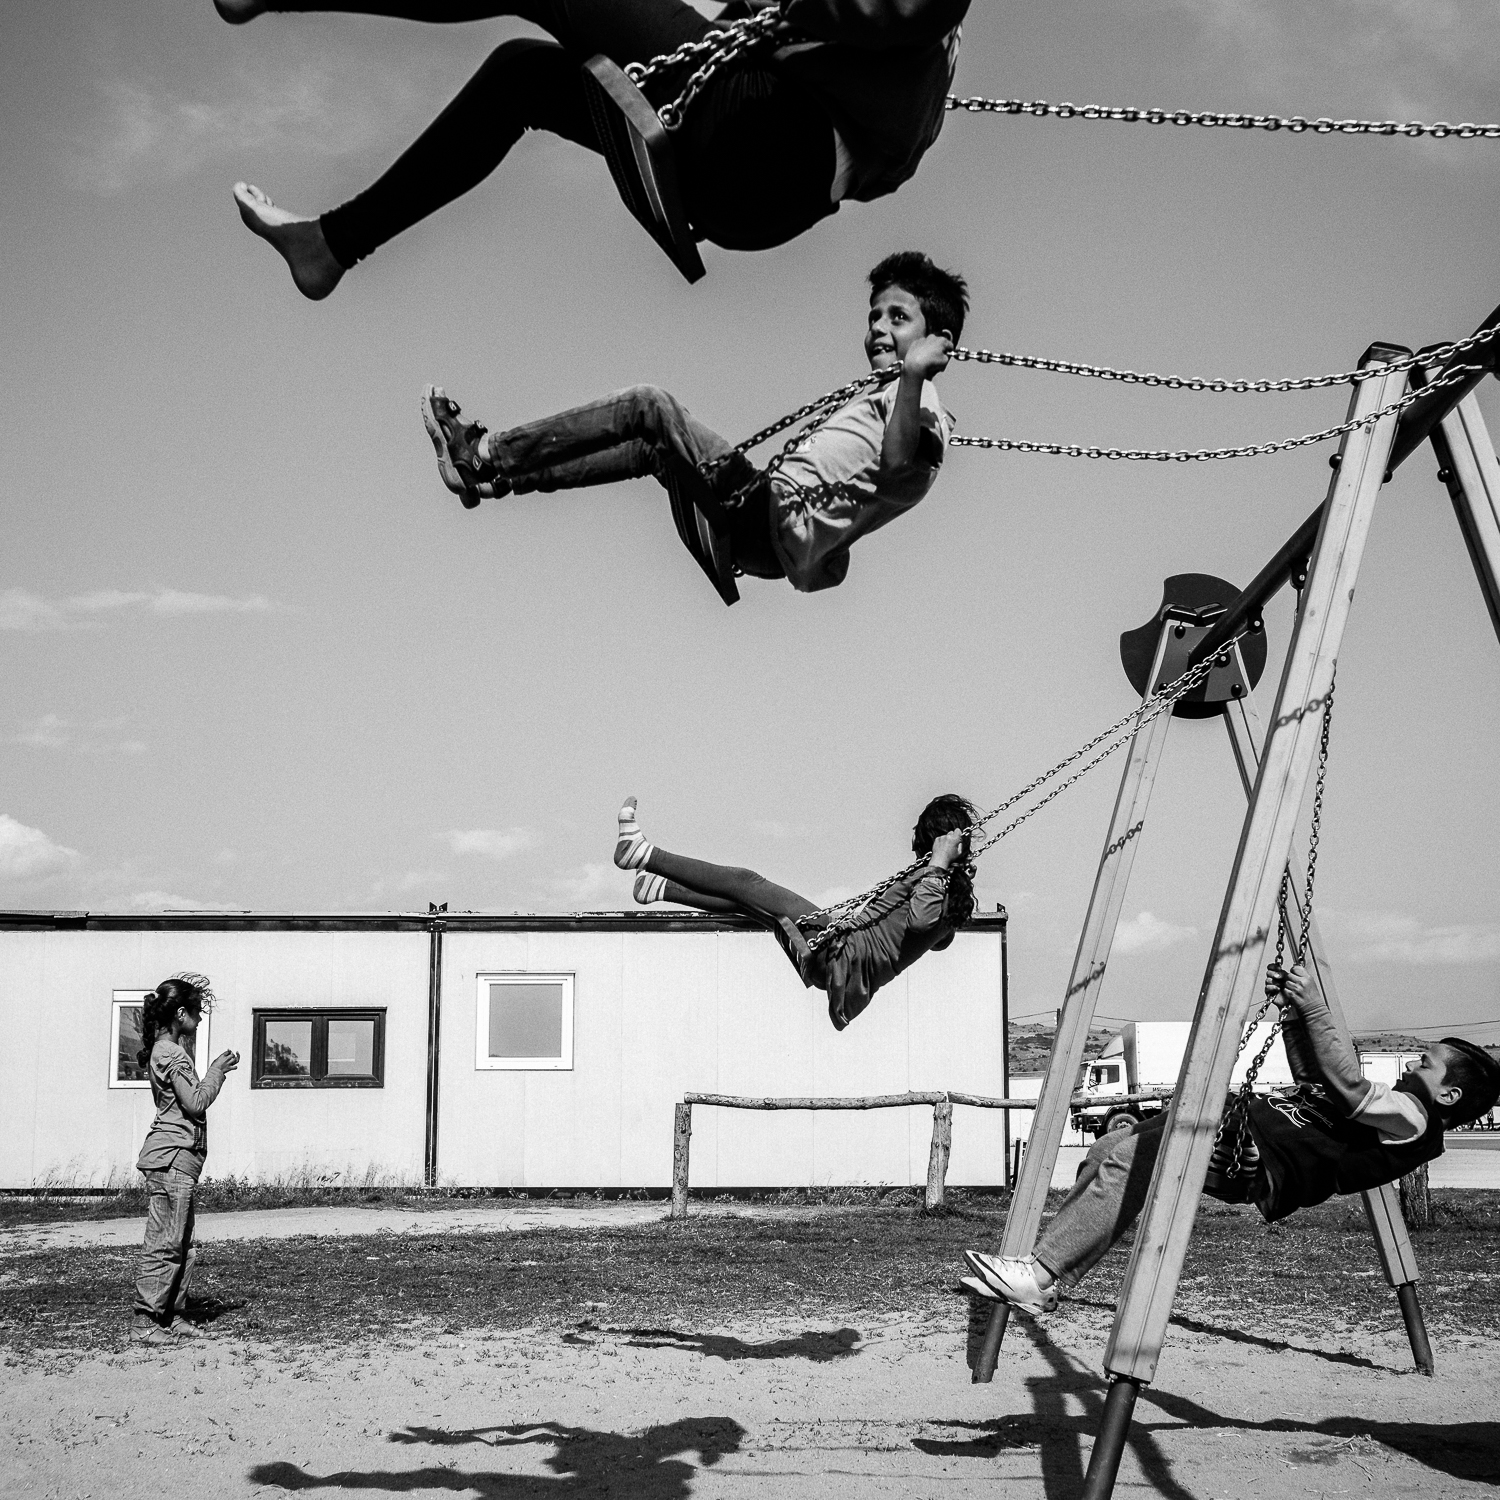  Children playing on a playground in Nea Kavali Camp, Greece, 2016 